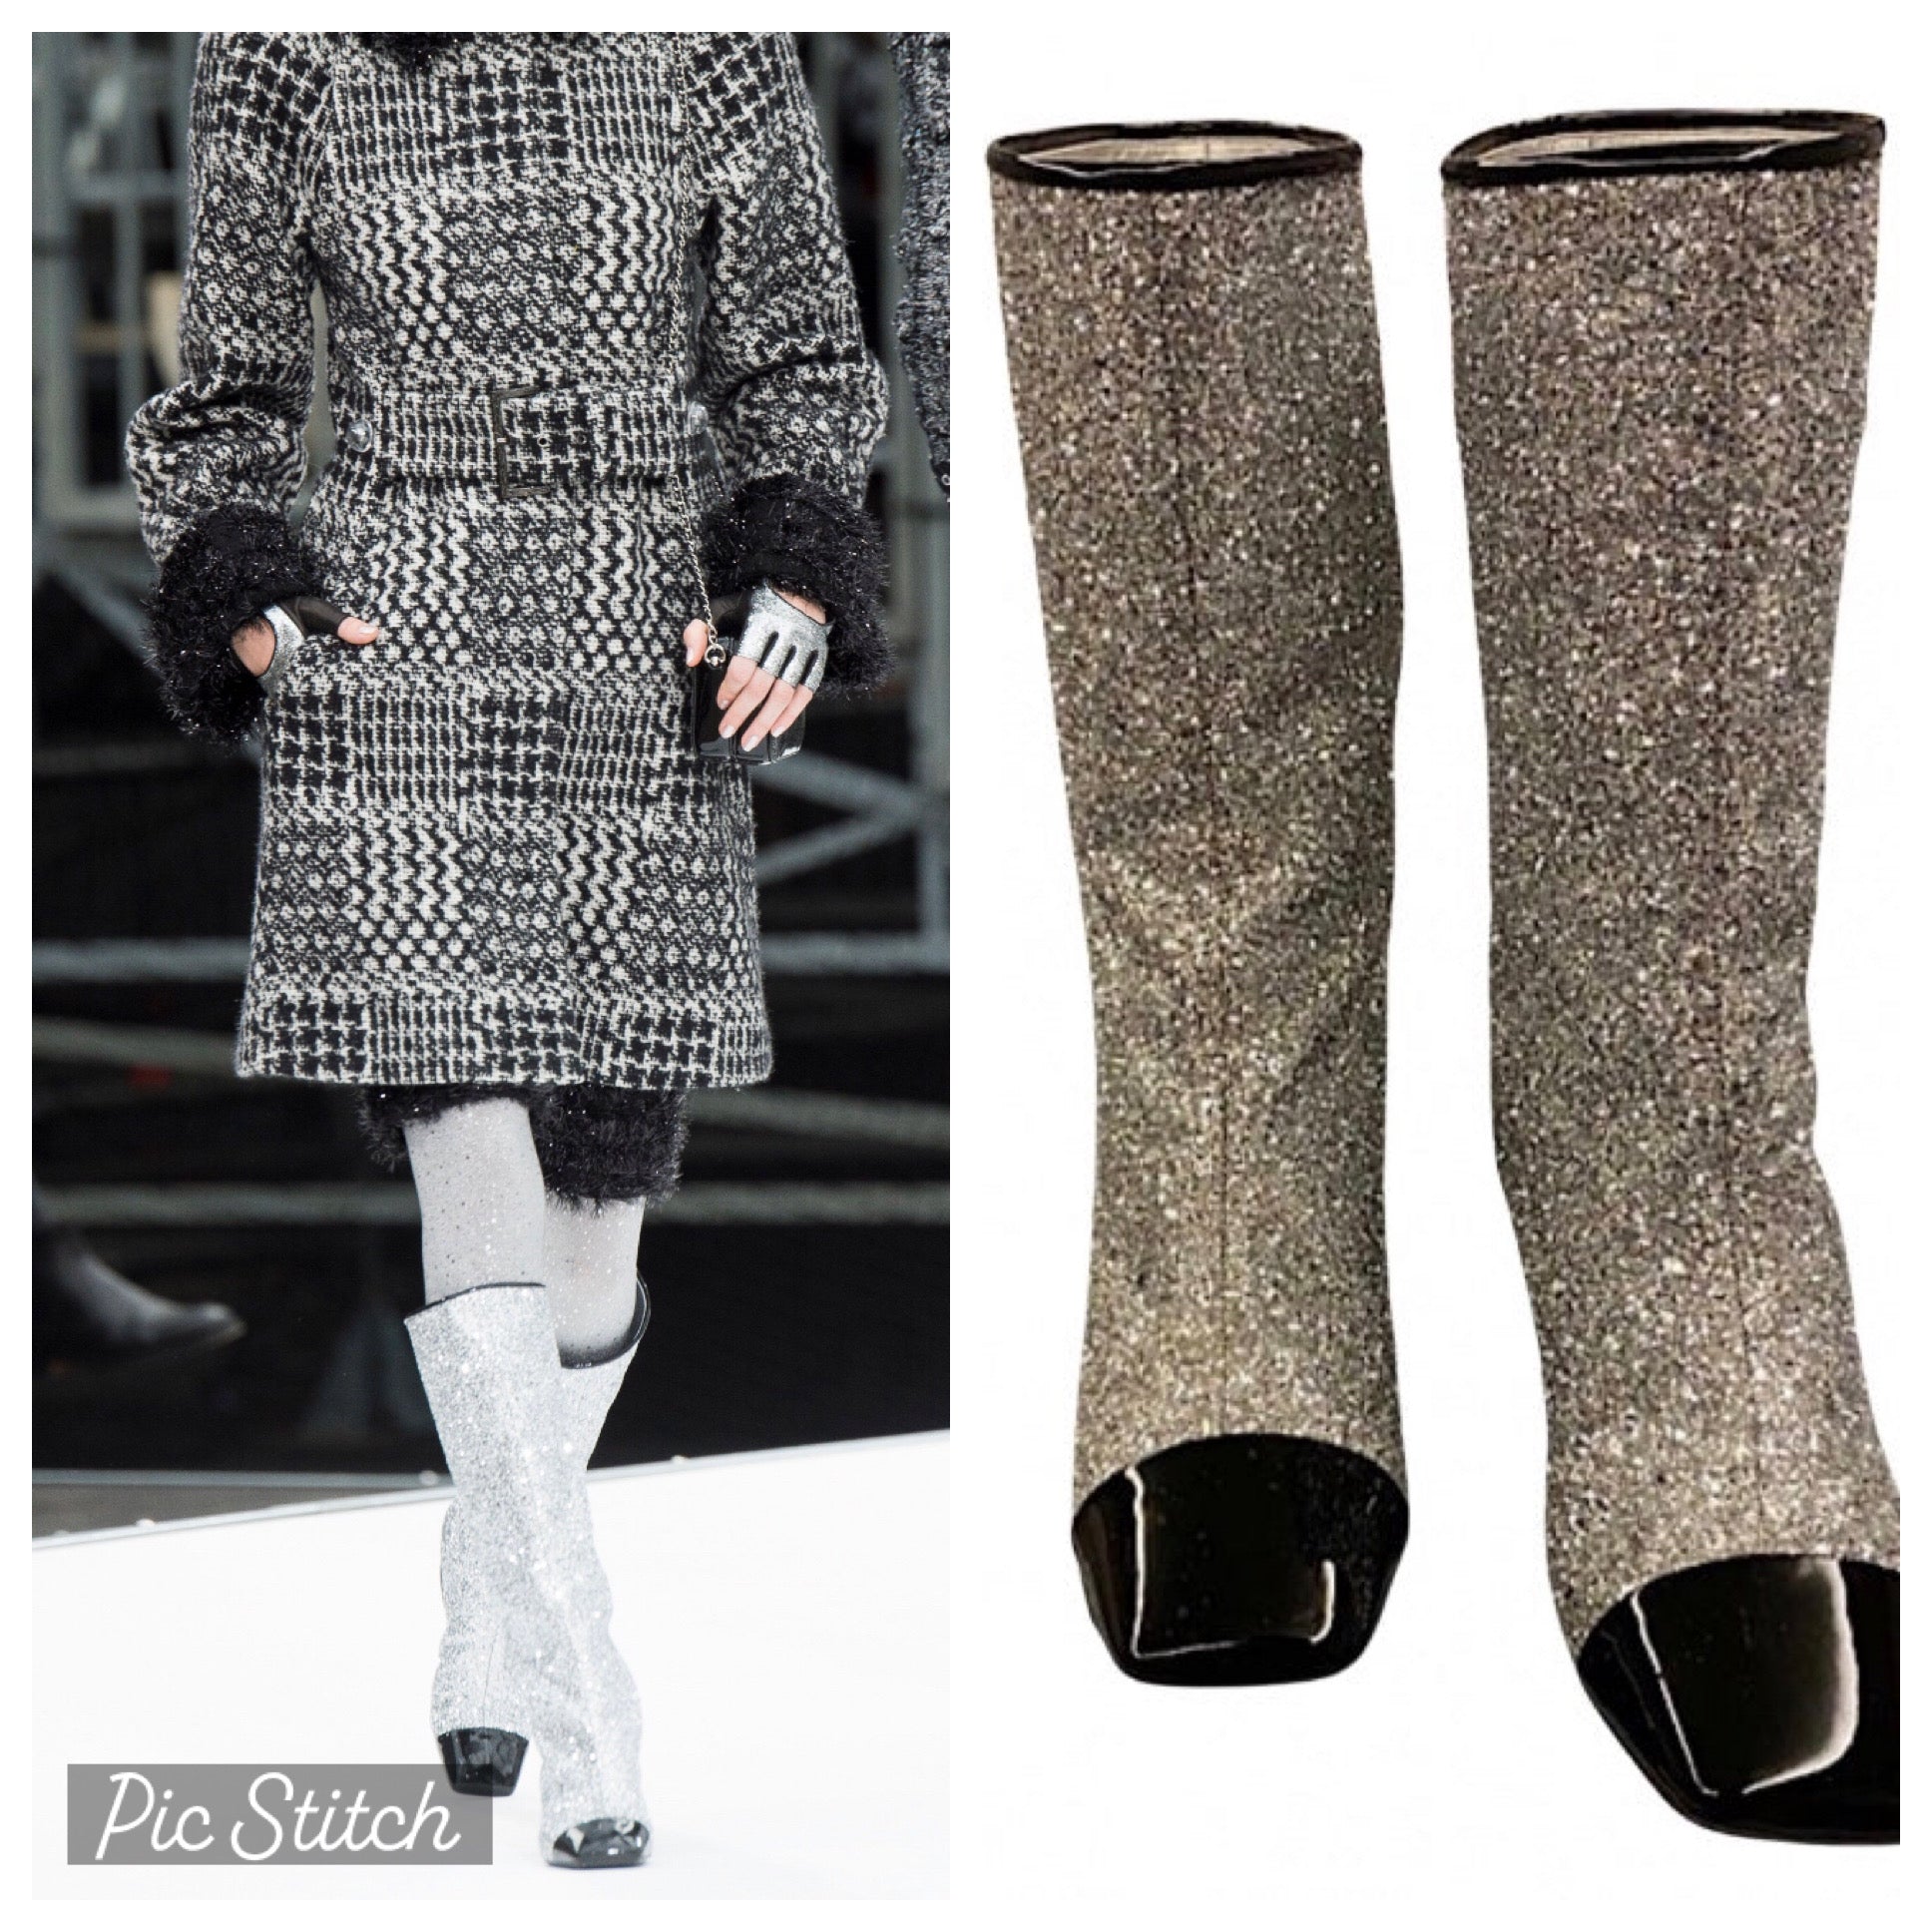 CHANEL, Shoes, Chanel Glitter Runway Cc Boots